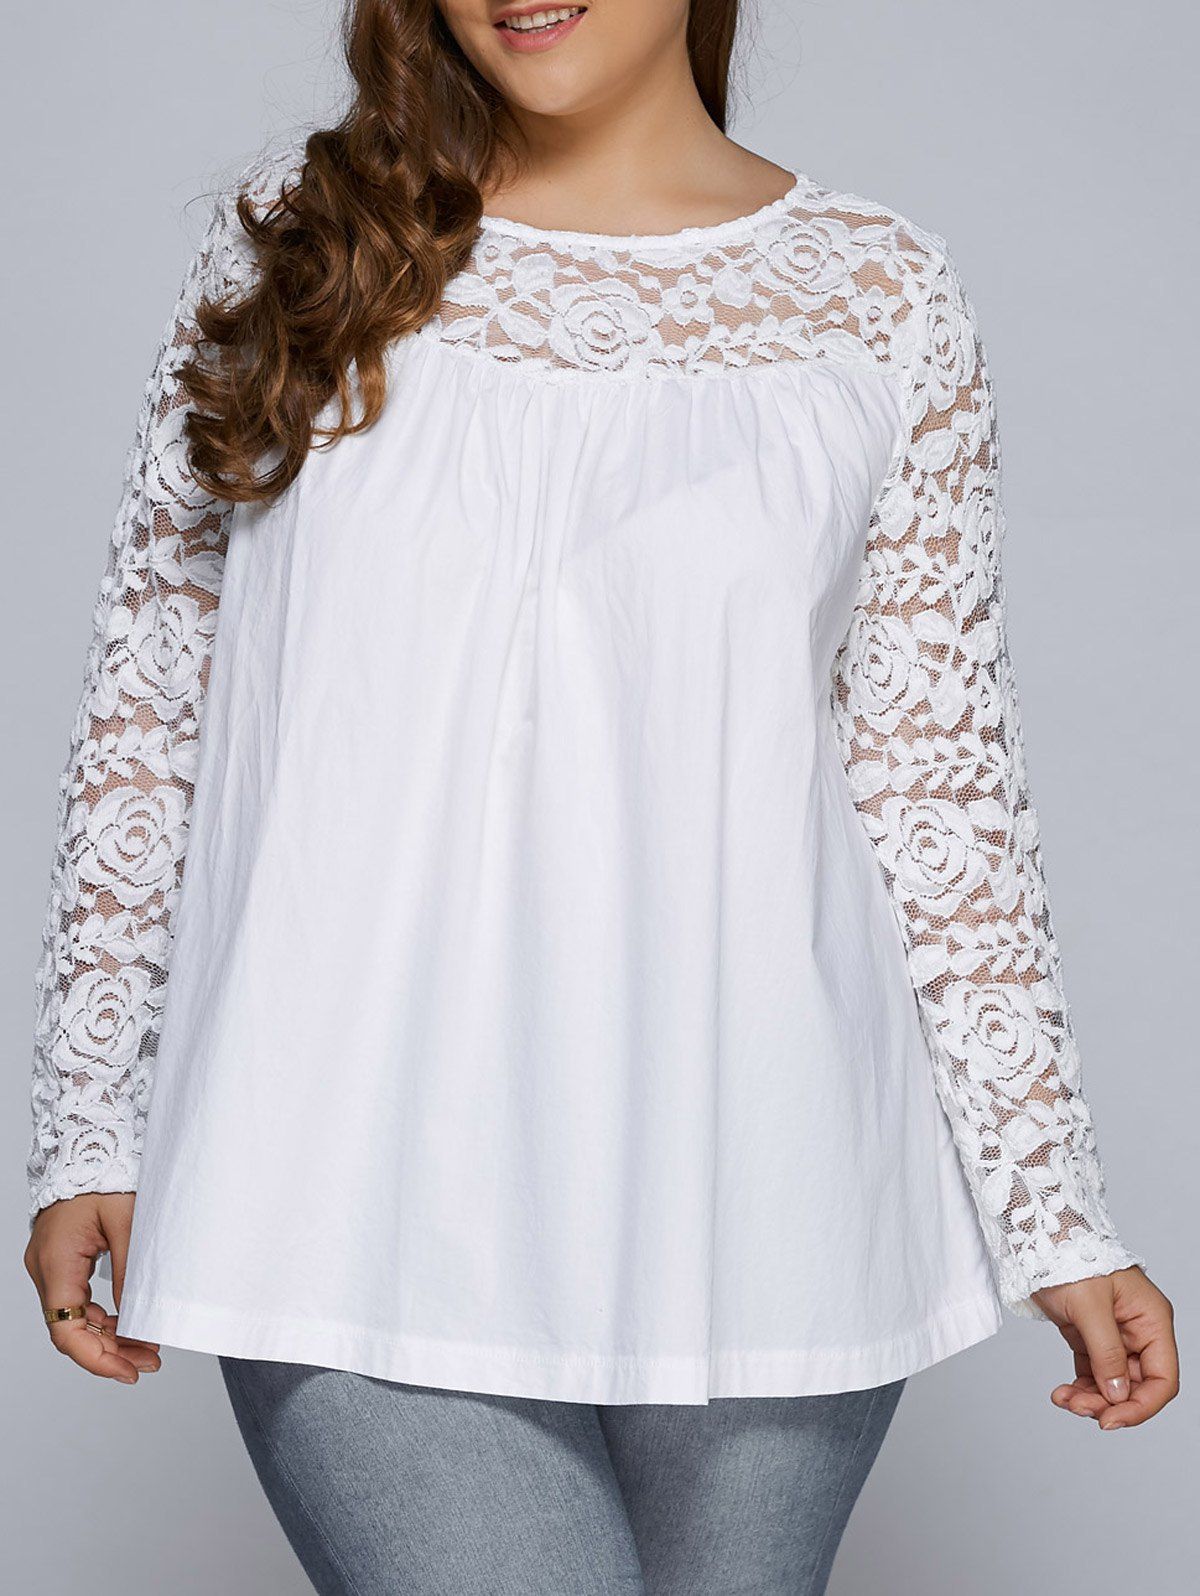 [17% OFF] 2021 Plus Size Lace Splicing Long Sleeve Blouse In WHITE ...